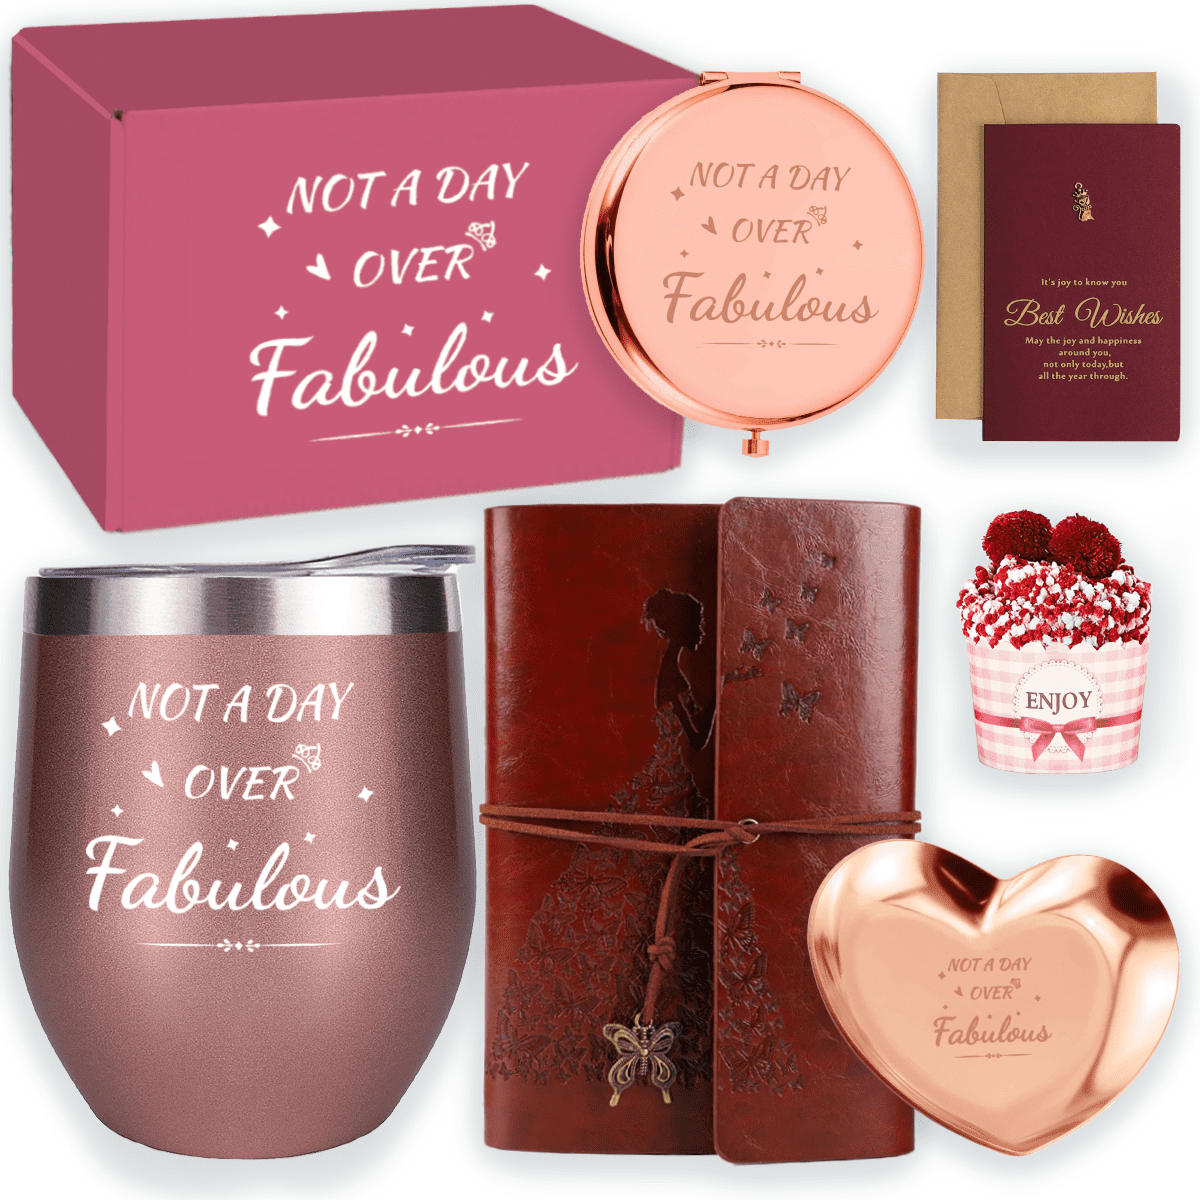  Birthday Gifts for Women, Unique Happy Birthday Gifts Sets for  Friends Mom Teen Girls Sister, Funny Gift Basket Box from Mothers Daughter  Grandma Female Her, Romantic Bag Wine Bday Gift Ideas